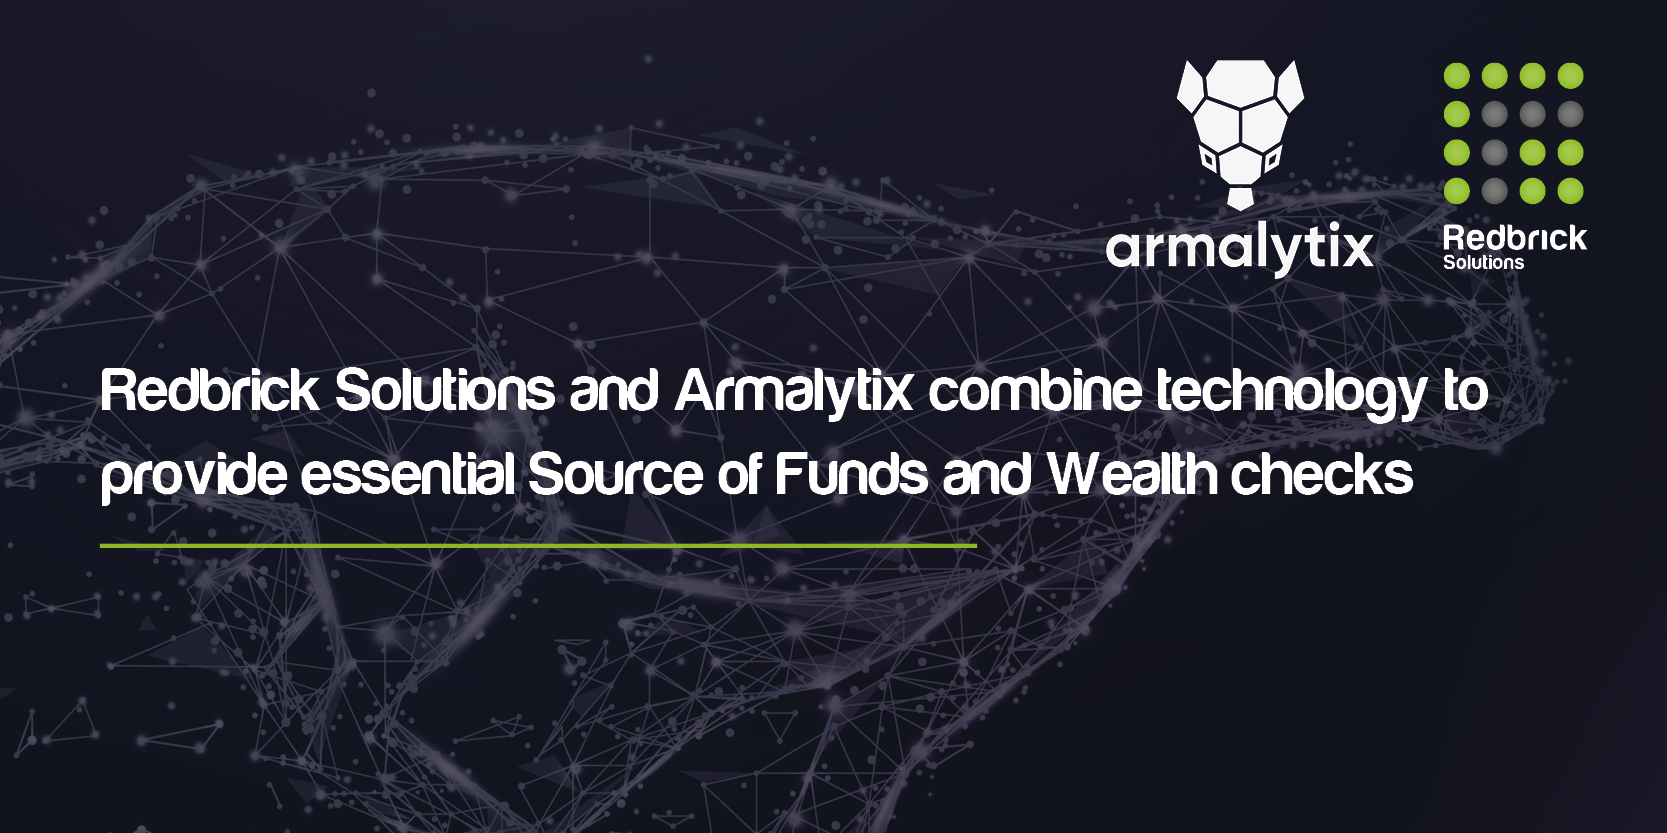 Redbrick Solutions and Armalytix combine technology to provide essential Source of Funds and Wealth checks